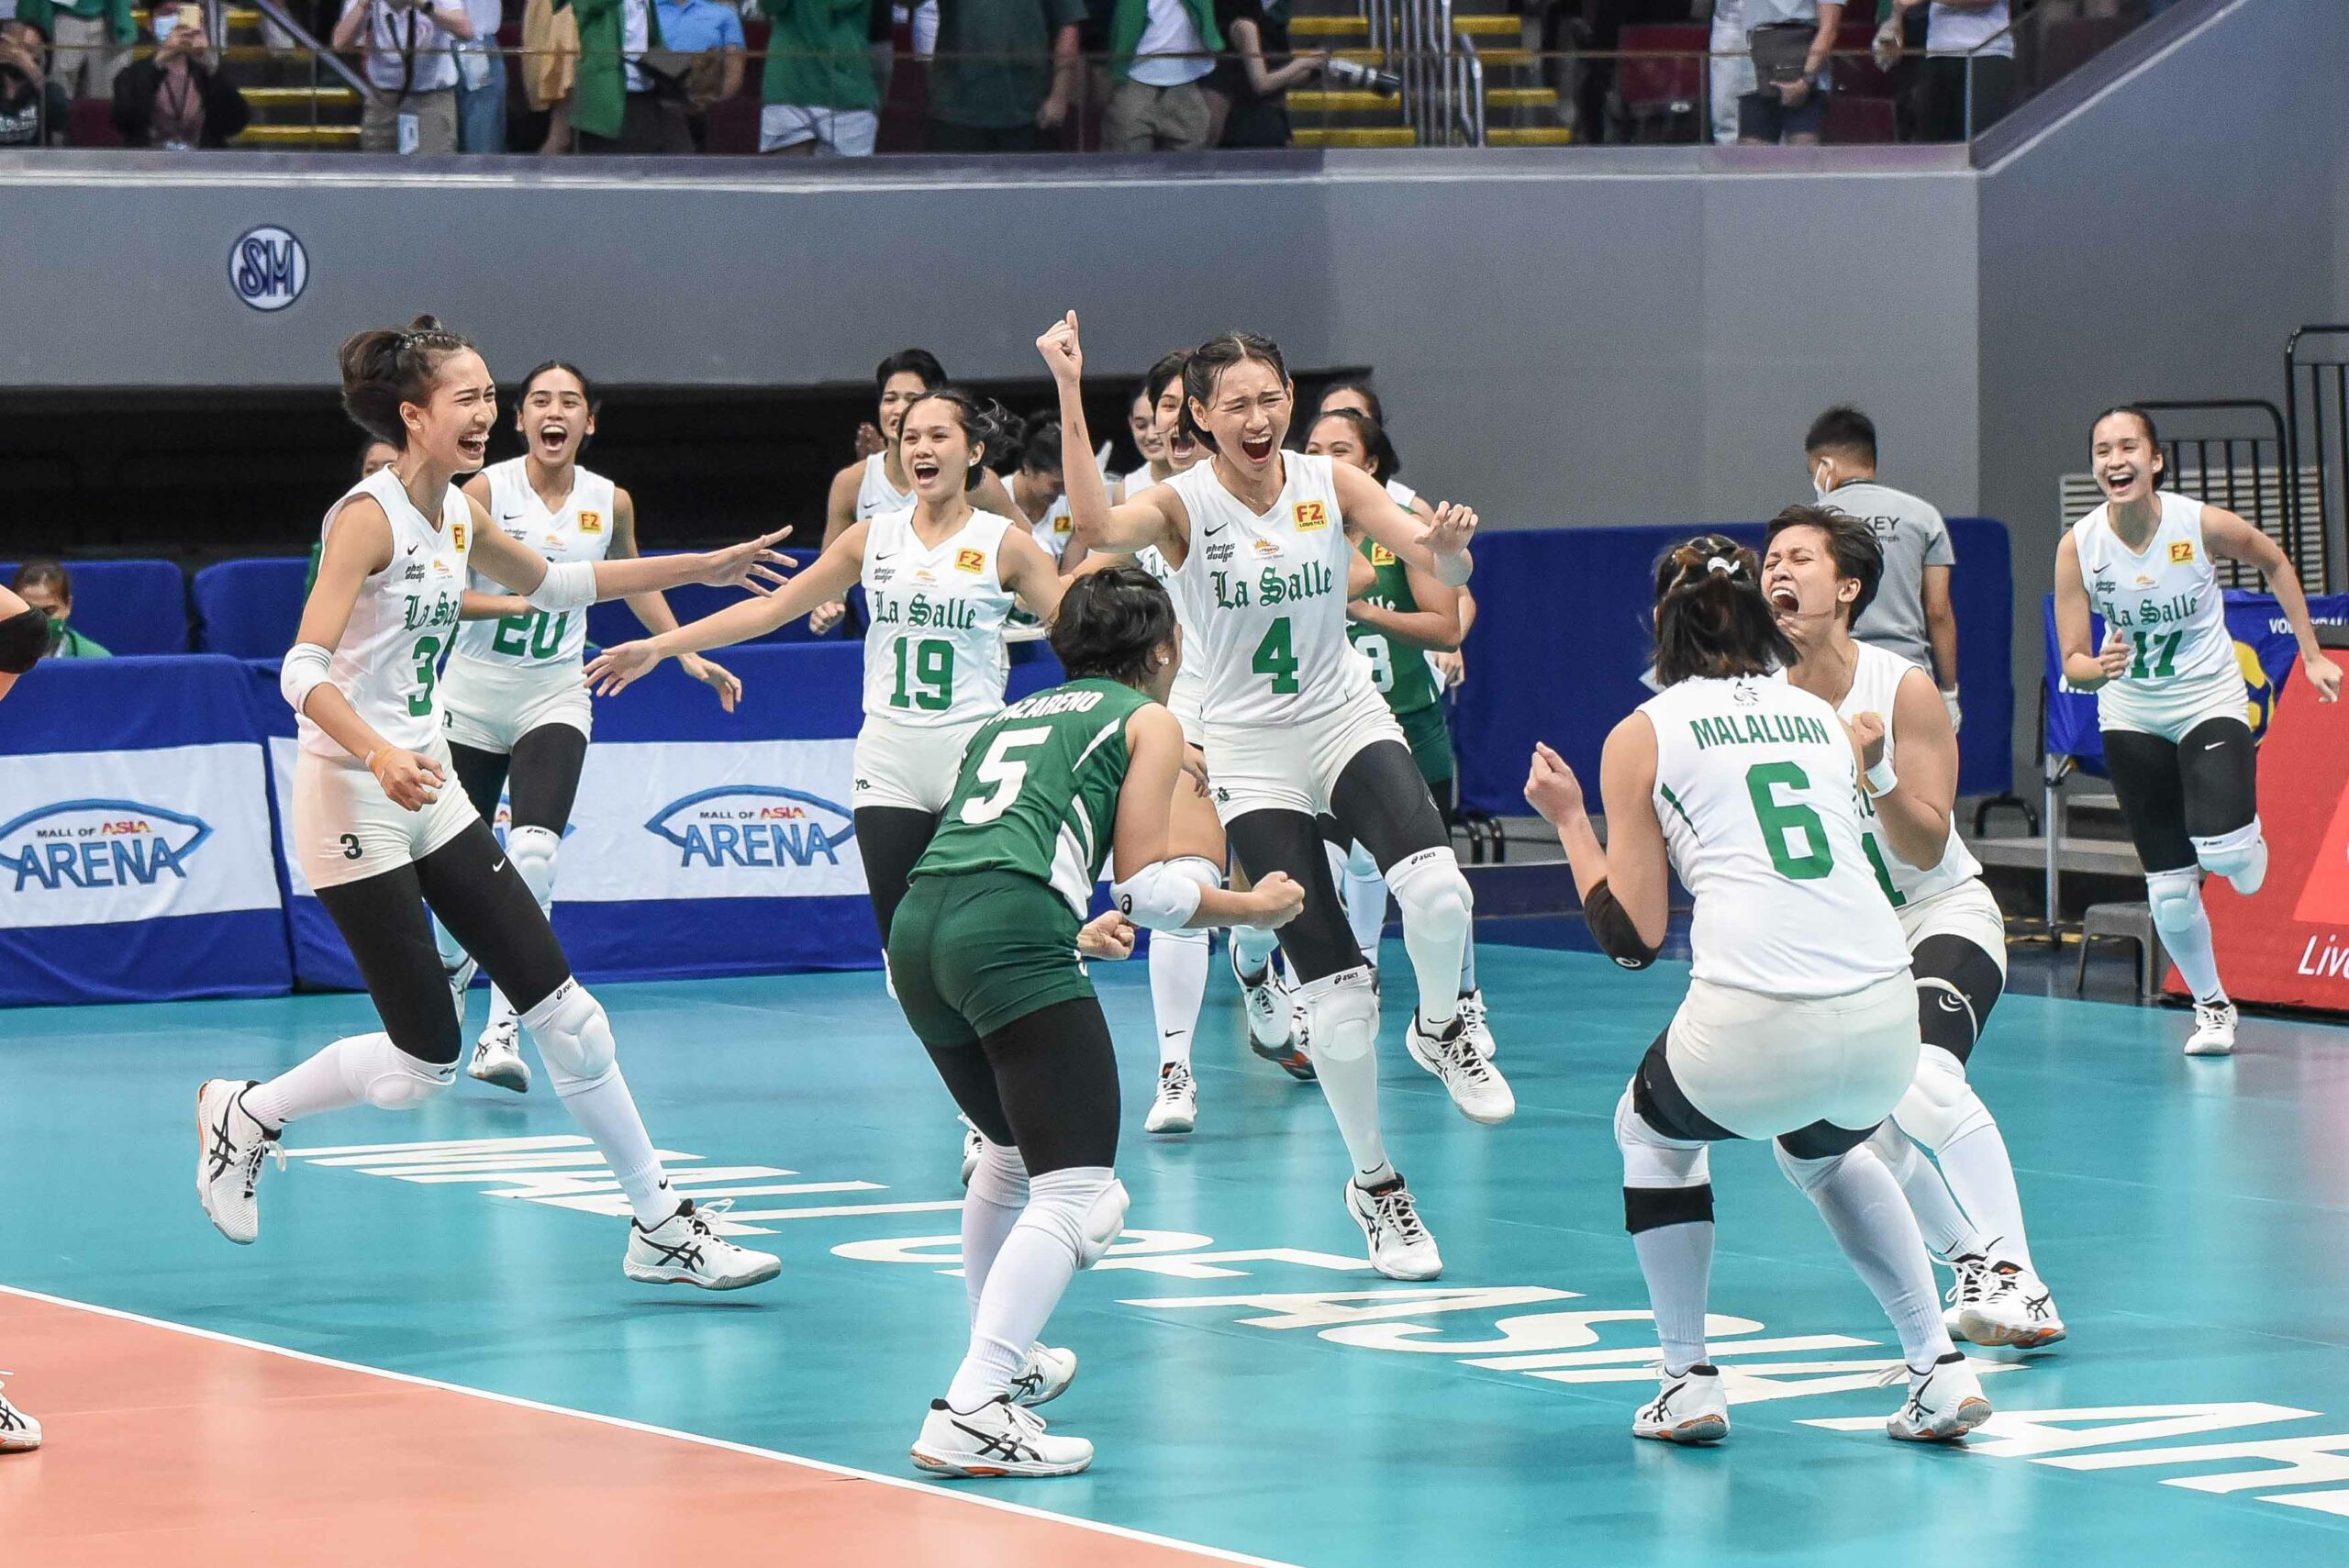 UAAP-Season-84-Womens-Volleyball-DLSU-vs-Ateneo-DLSU-3-scaled UAAP 84: La Salle stands tall over Ateneo for 10th straight time, advances to Finals ADMU DLSU News UAAP Volleyball  - philippine sports news